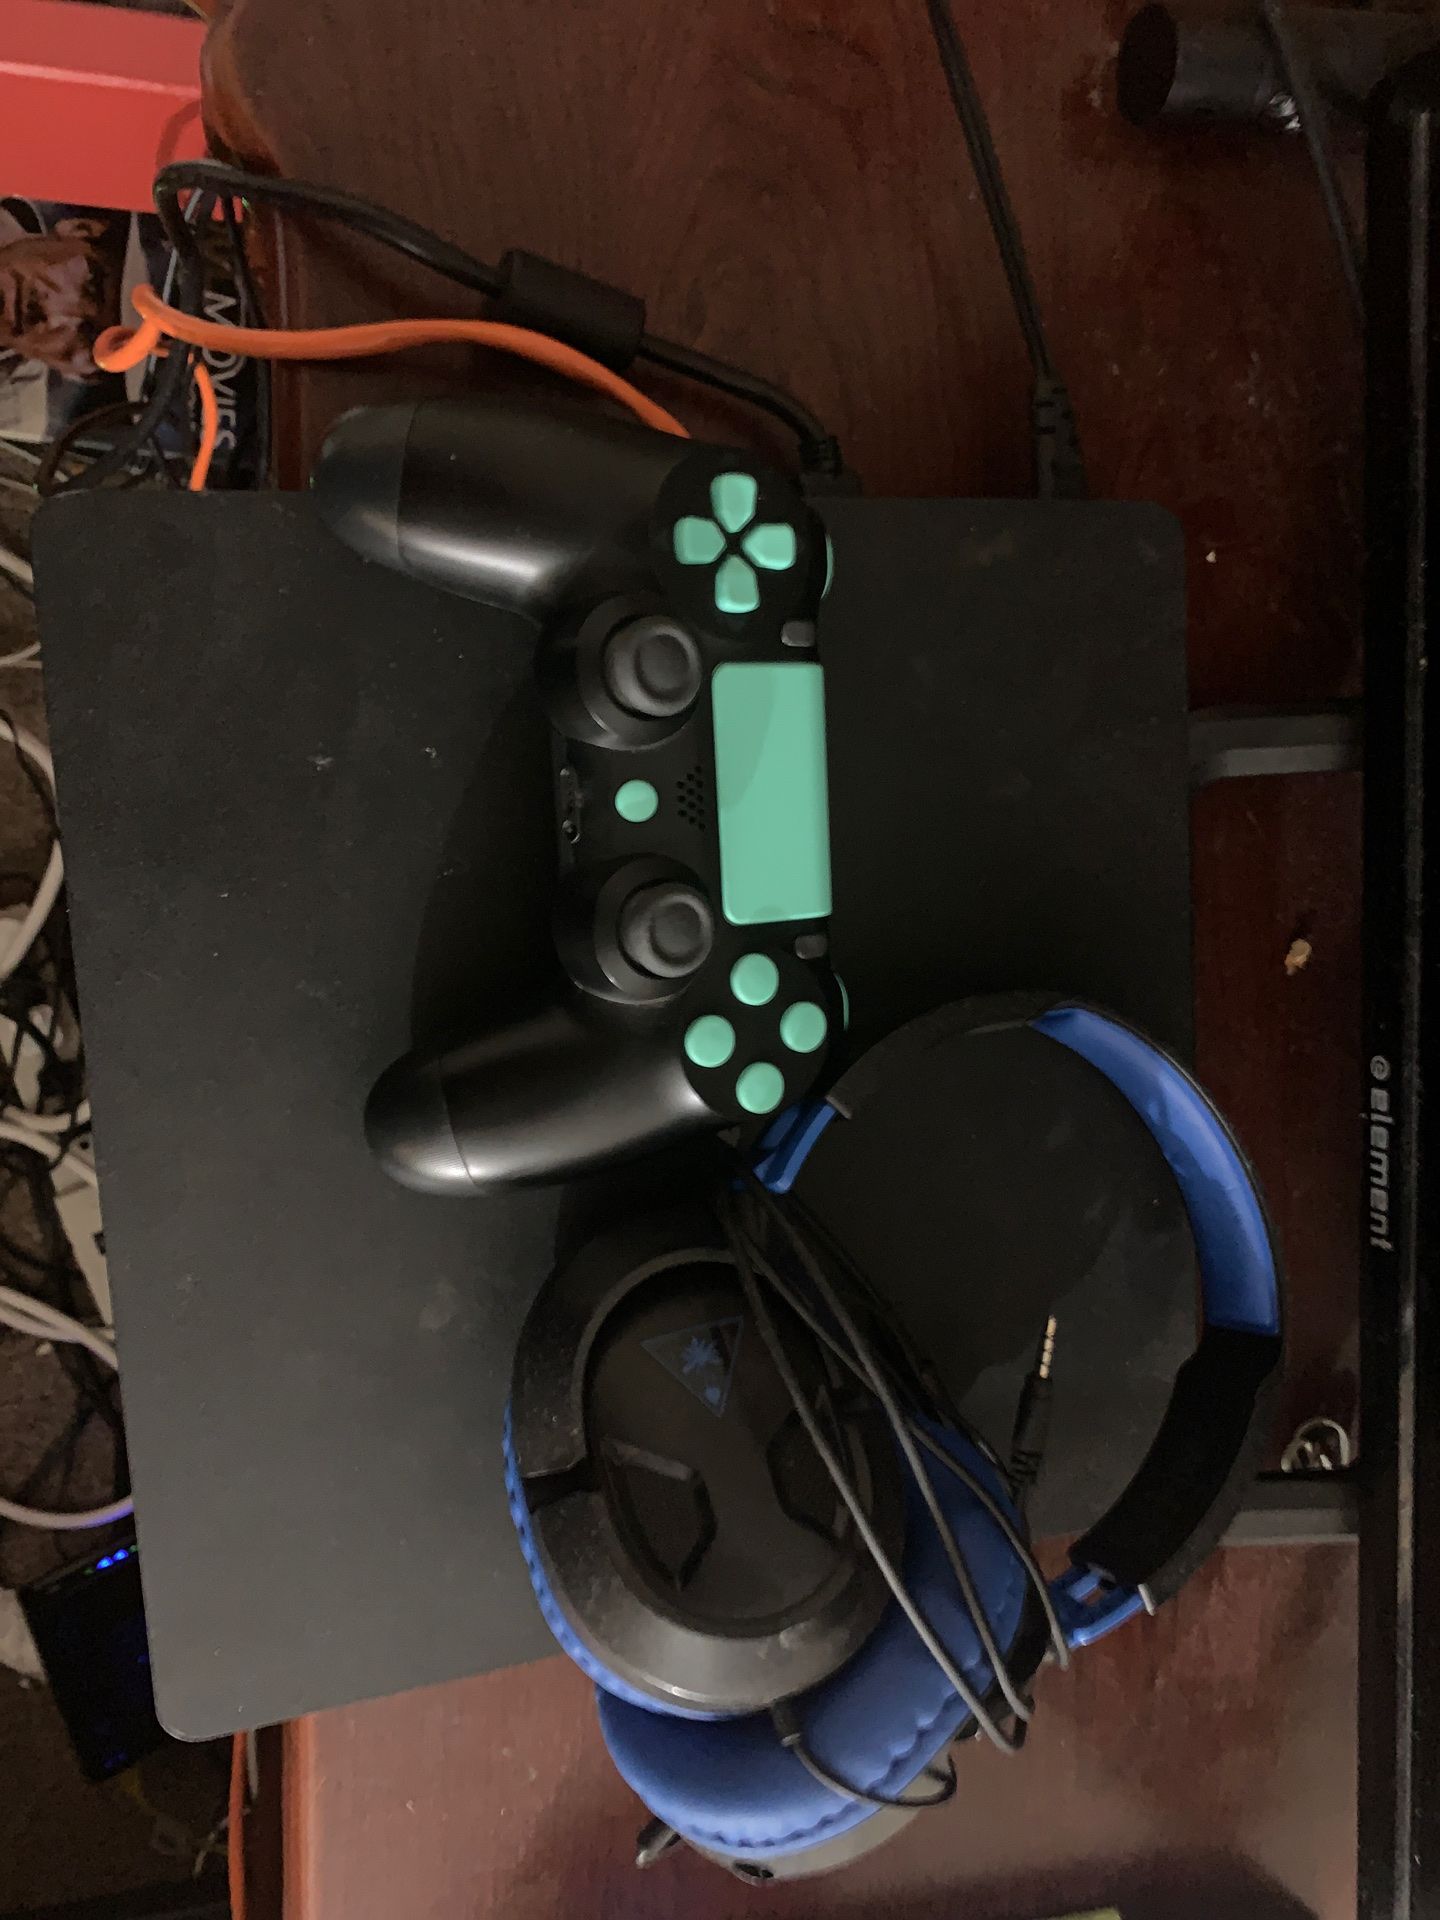 Ps4 hardly used negotiable with custom controller and turtle beach headset